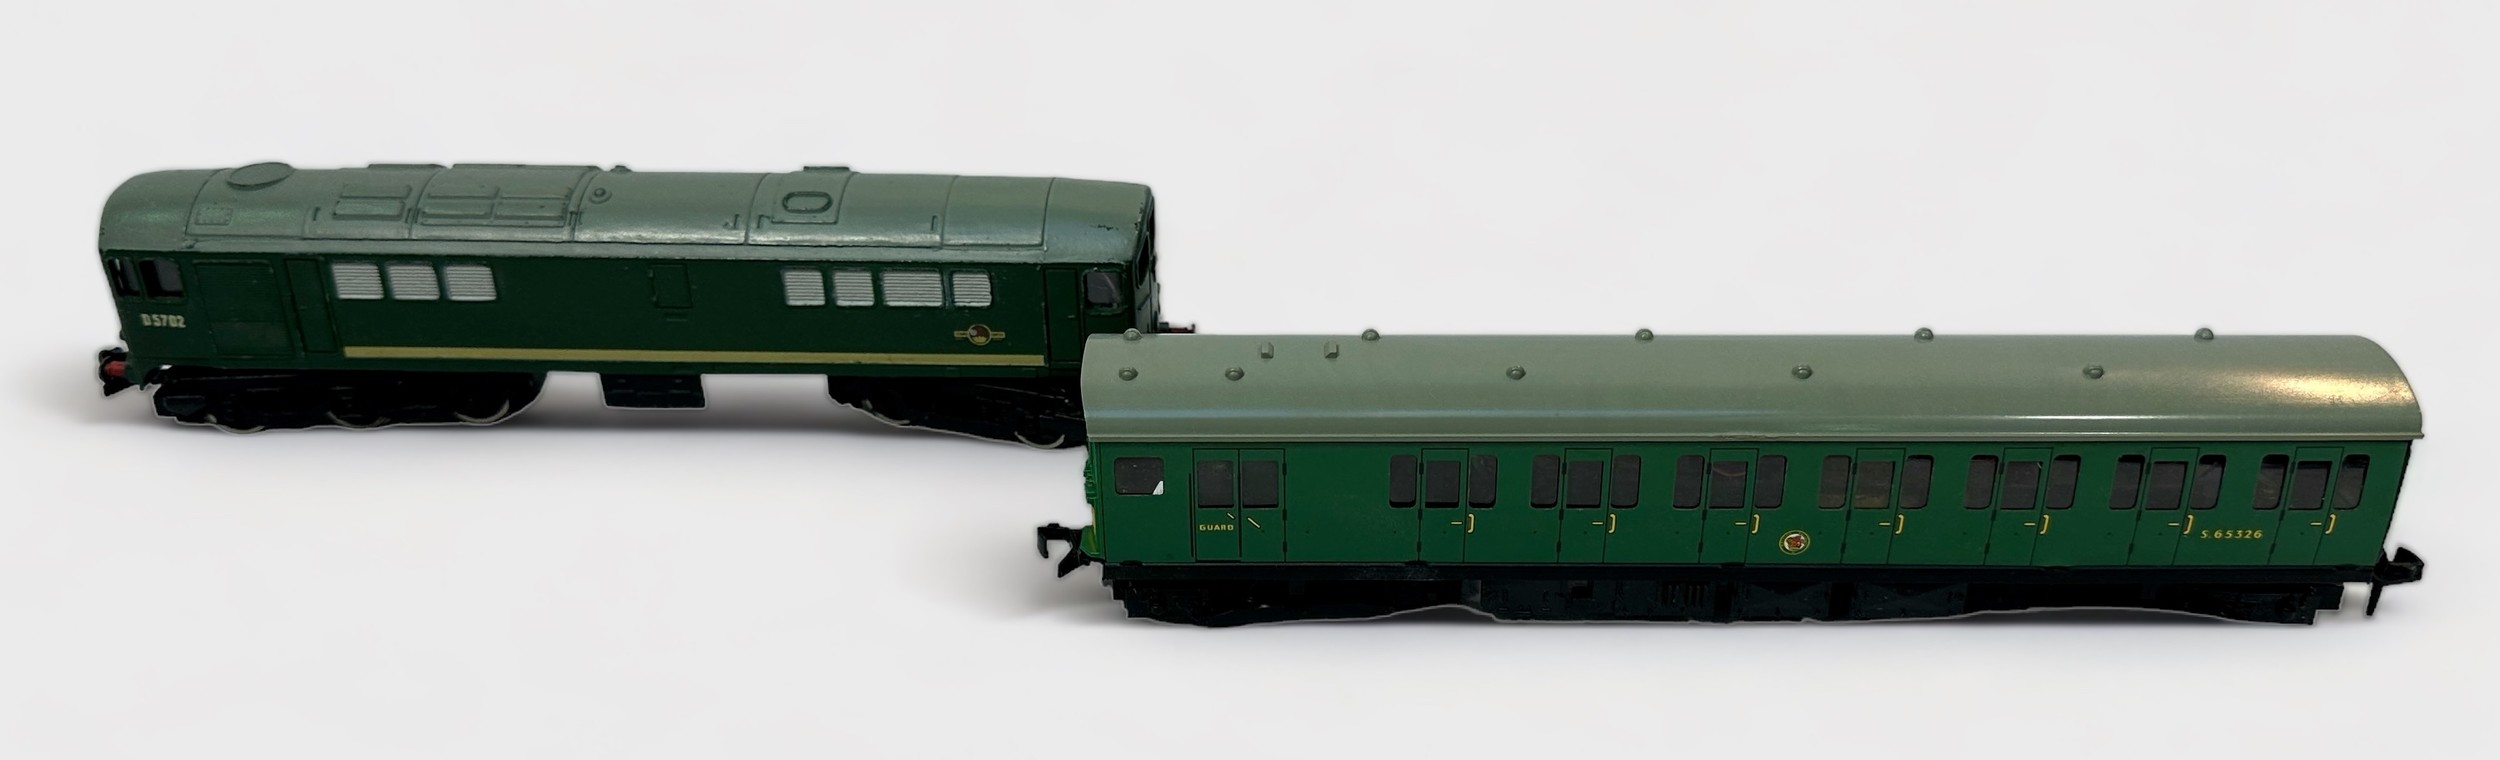 A Hornby-Dublo 2233 Co-Bo Diesel-Electric Locomotive (2-Rail), housed in original picture box with - Image 2 of 3